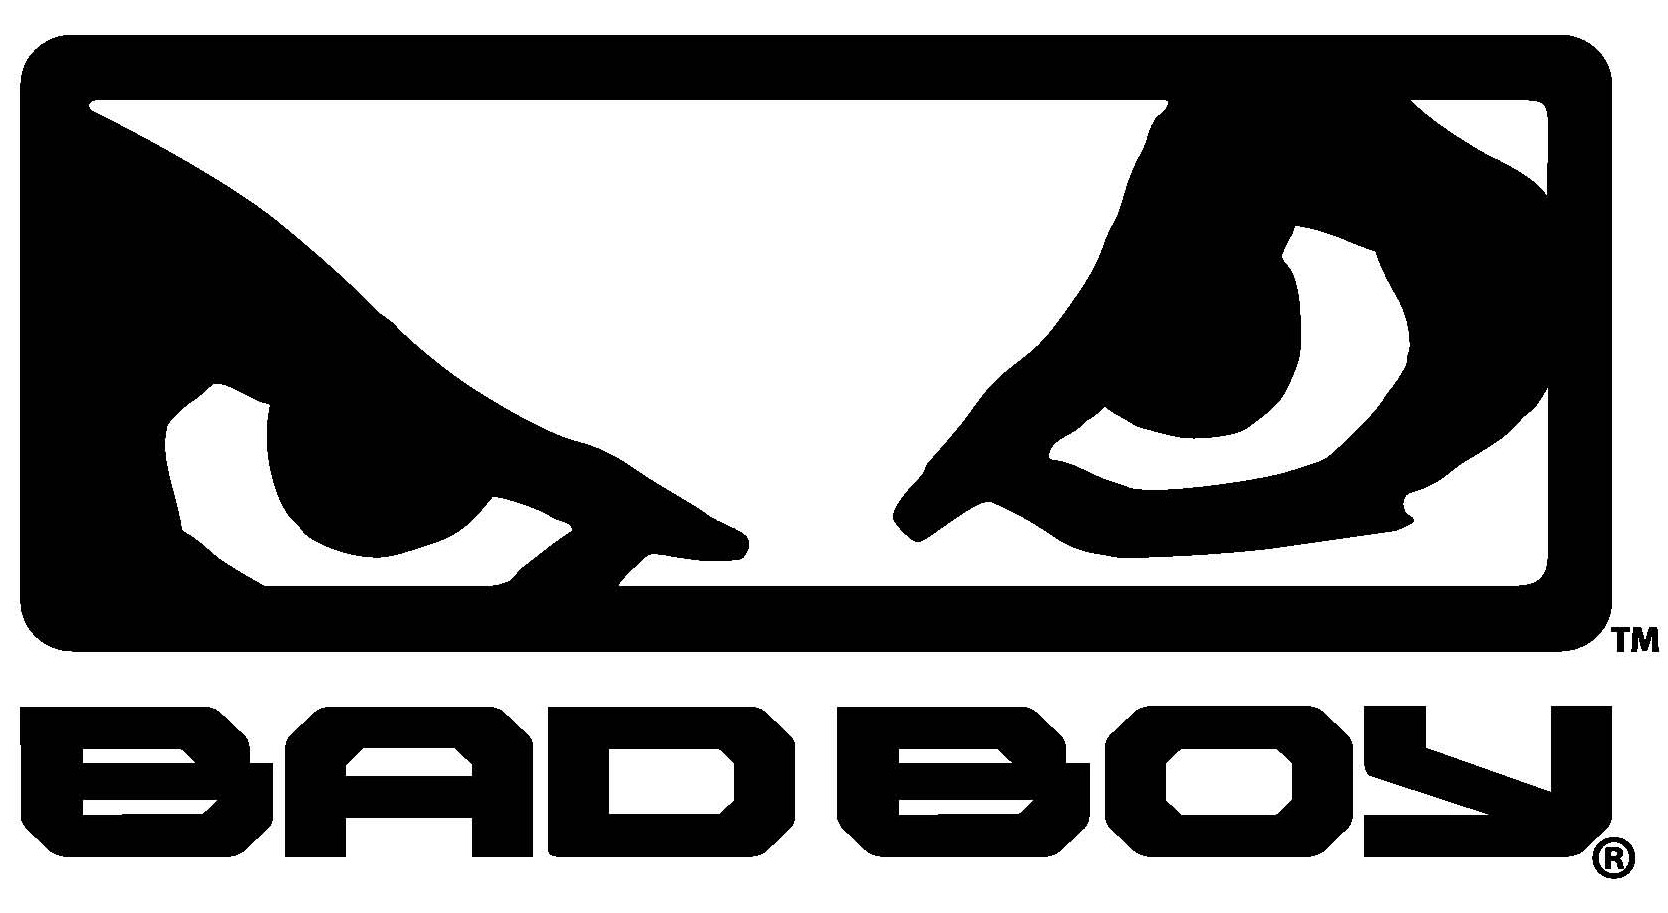 Bad Boy Mma Logo Wallpaper Images Pictures   Becuo